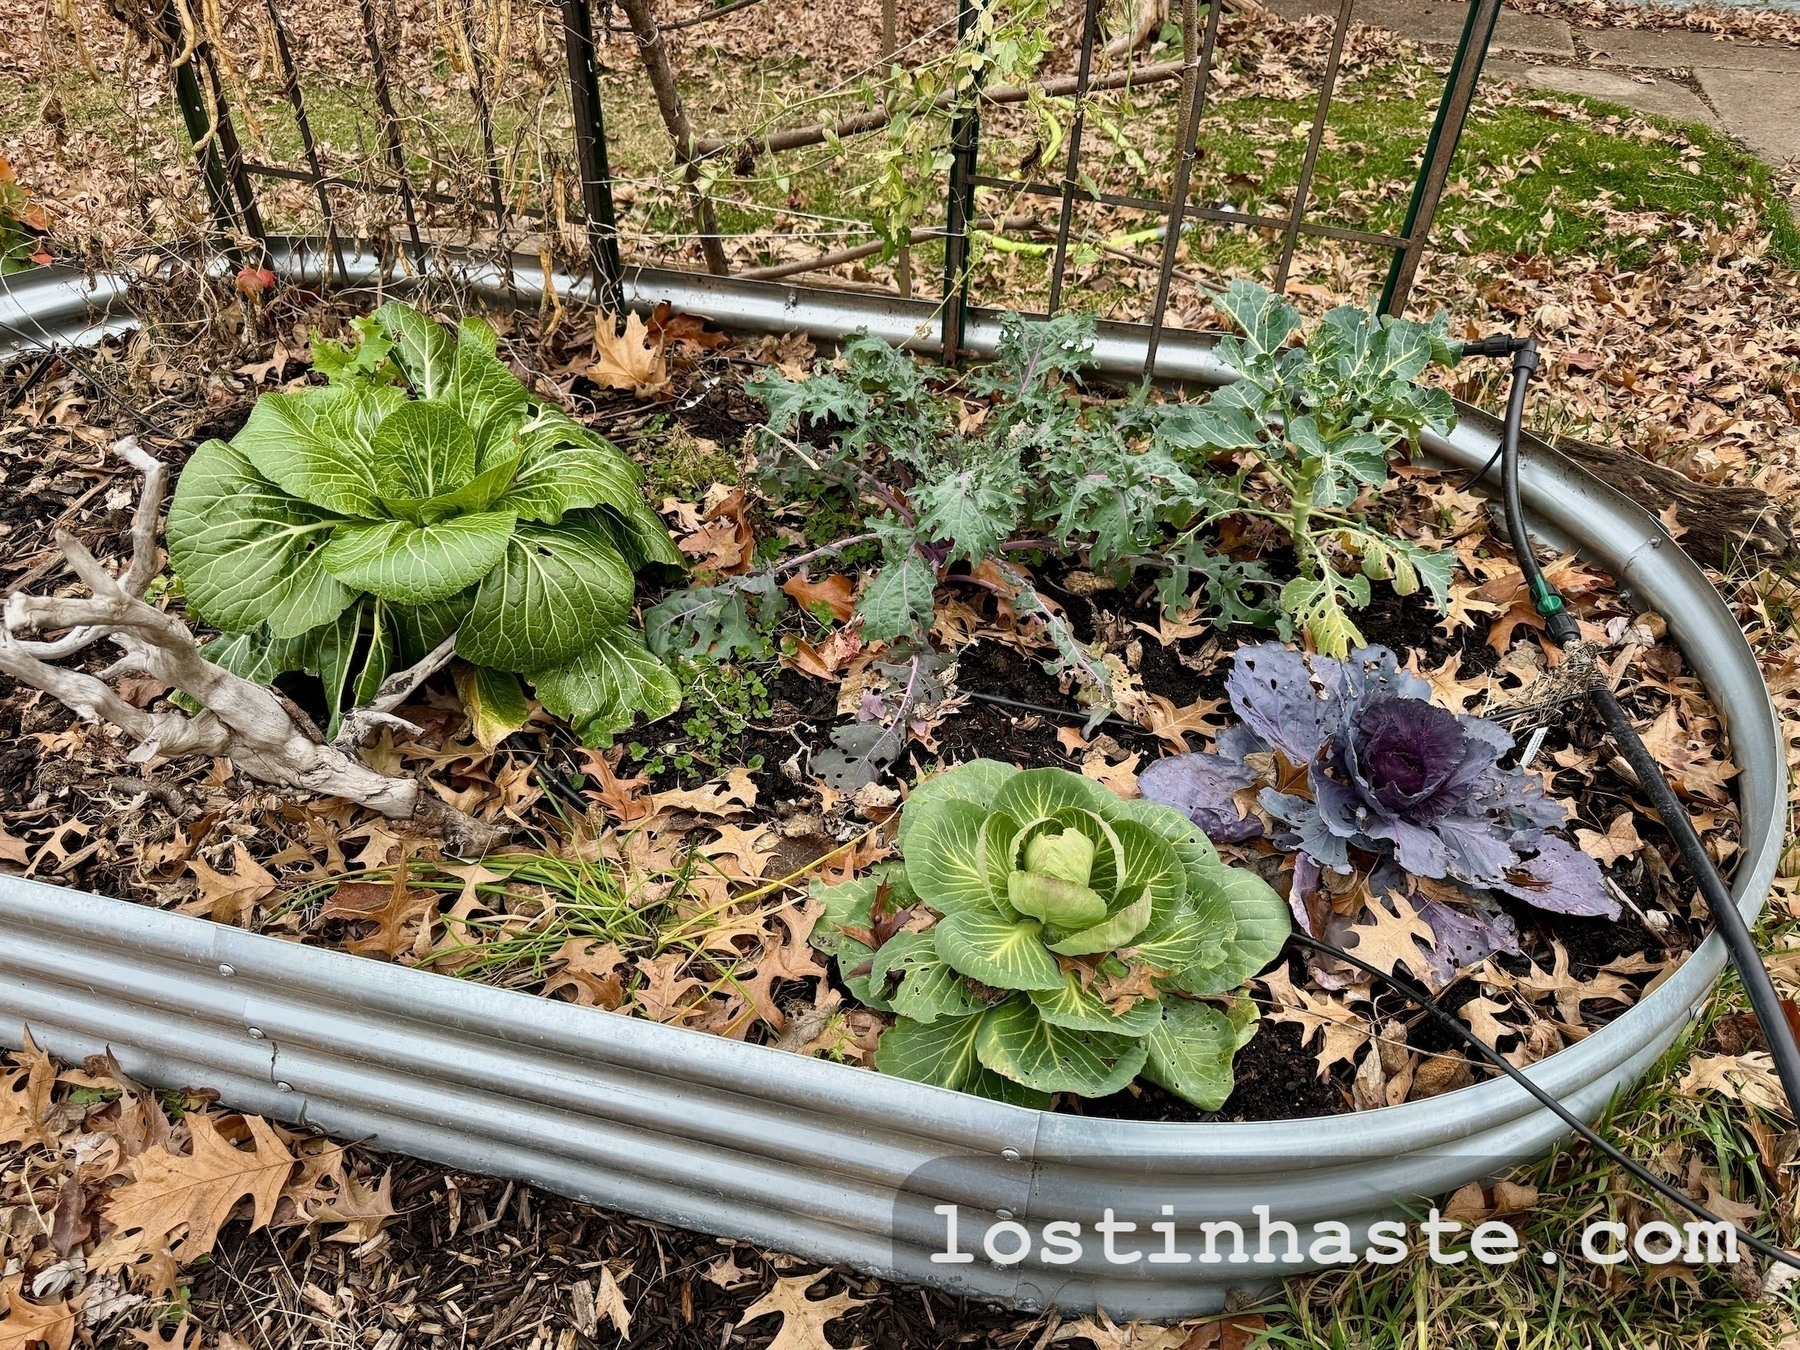 Three different types of winter lettuce, along with fallen leaves, in a galvanized metal container.